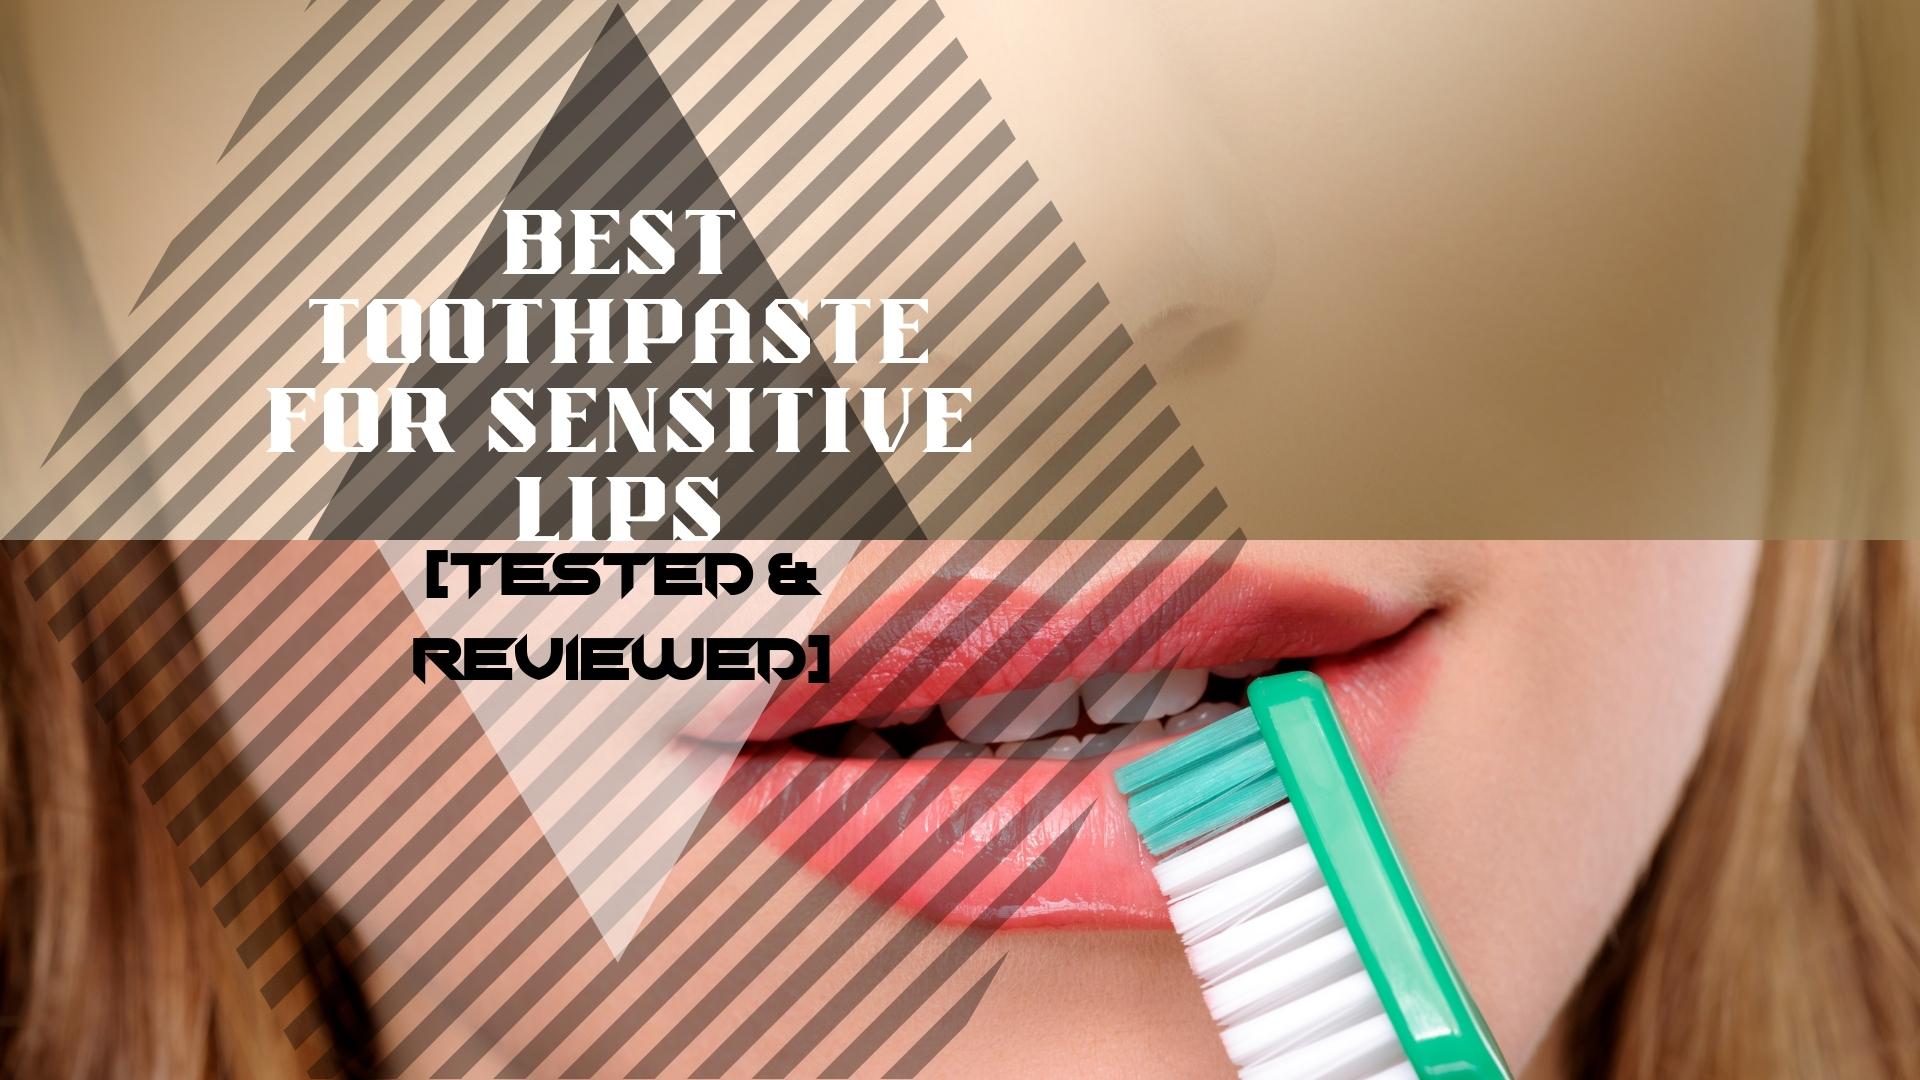 Best Toothpaste For Sensitive Lips